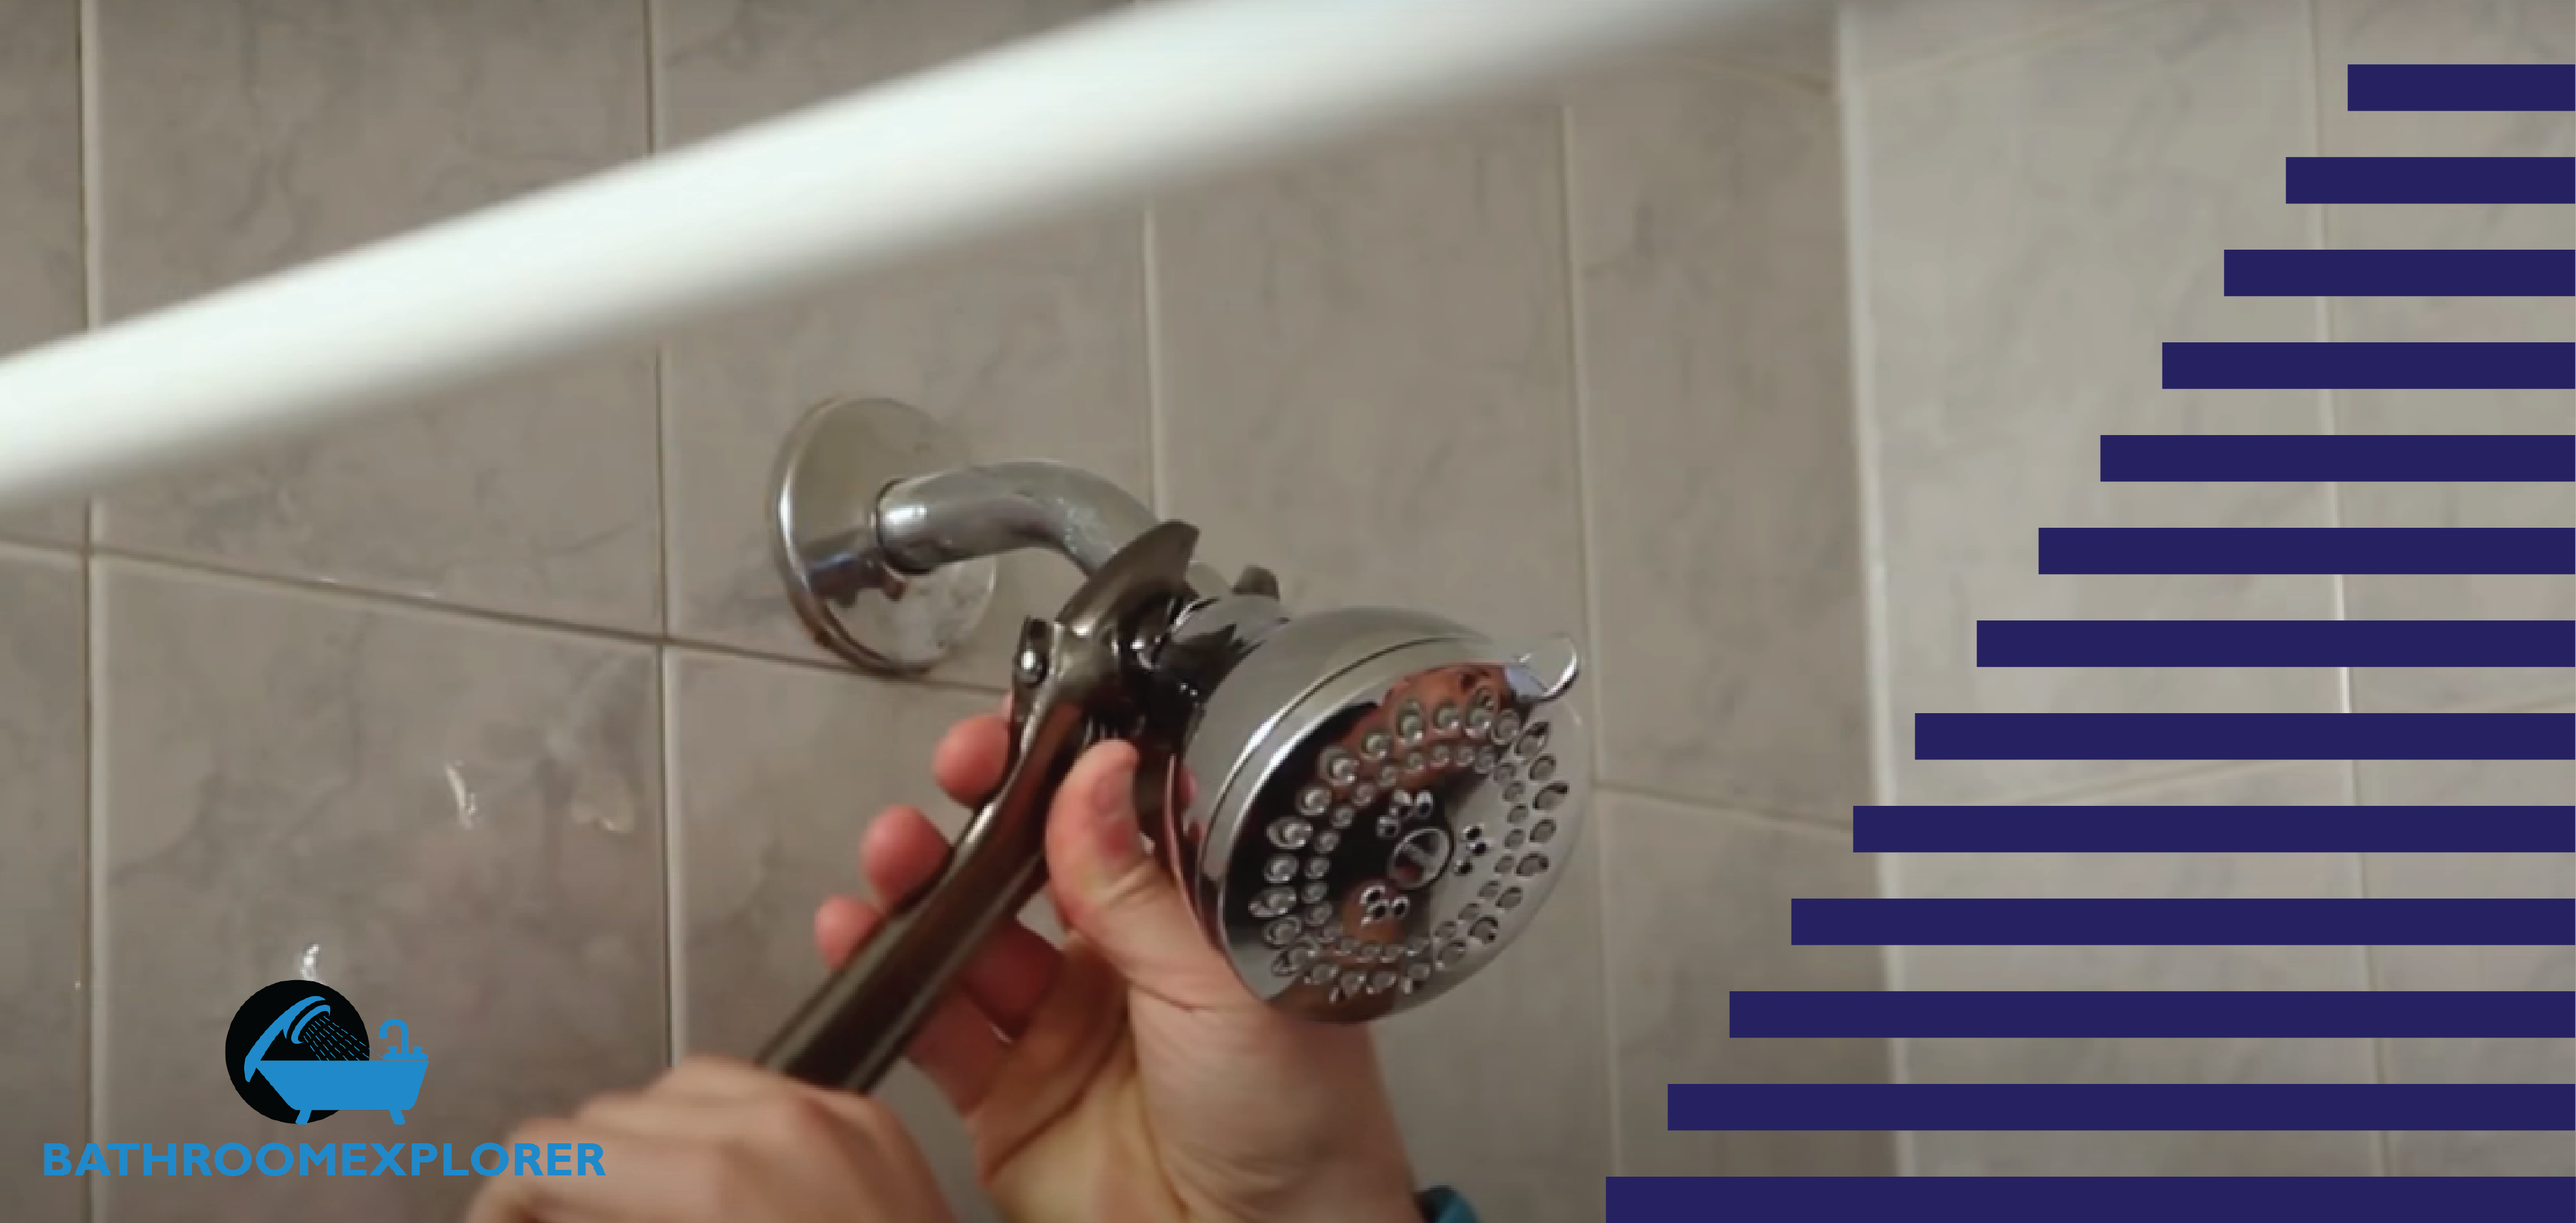 How To Remove A Shower Head That Is Glued On